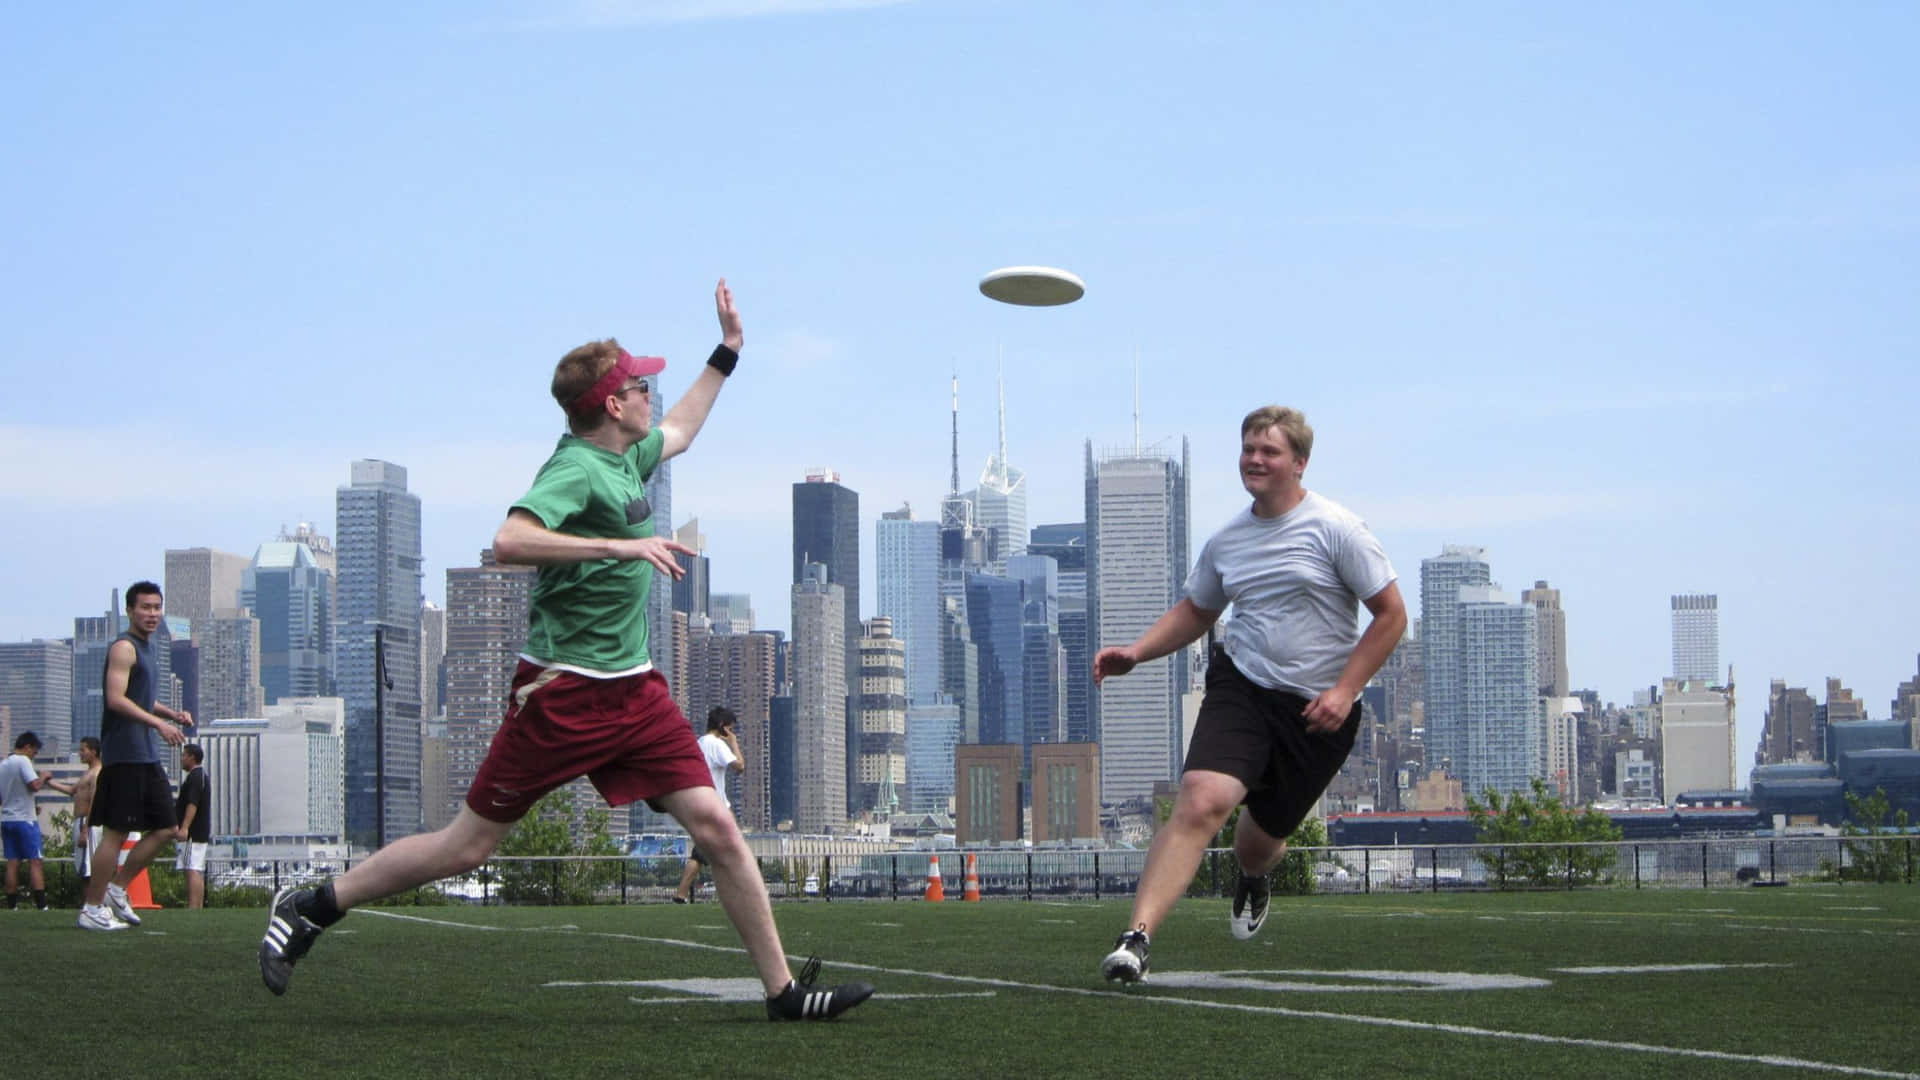 Ultimate Frisbee players tossing a frisbee in a laid-back competition.